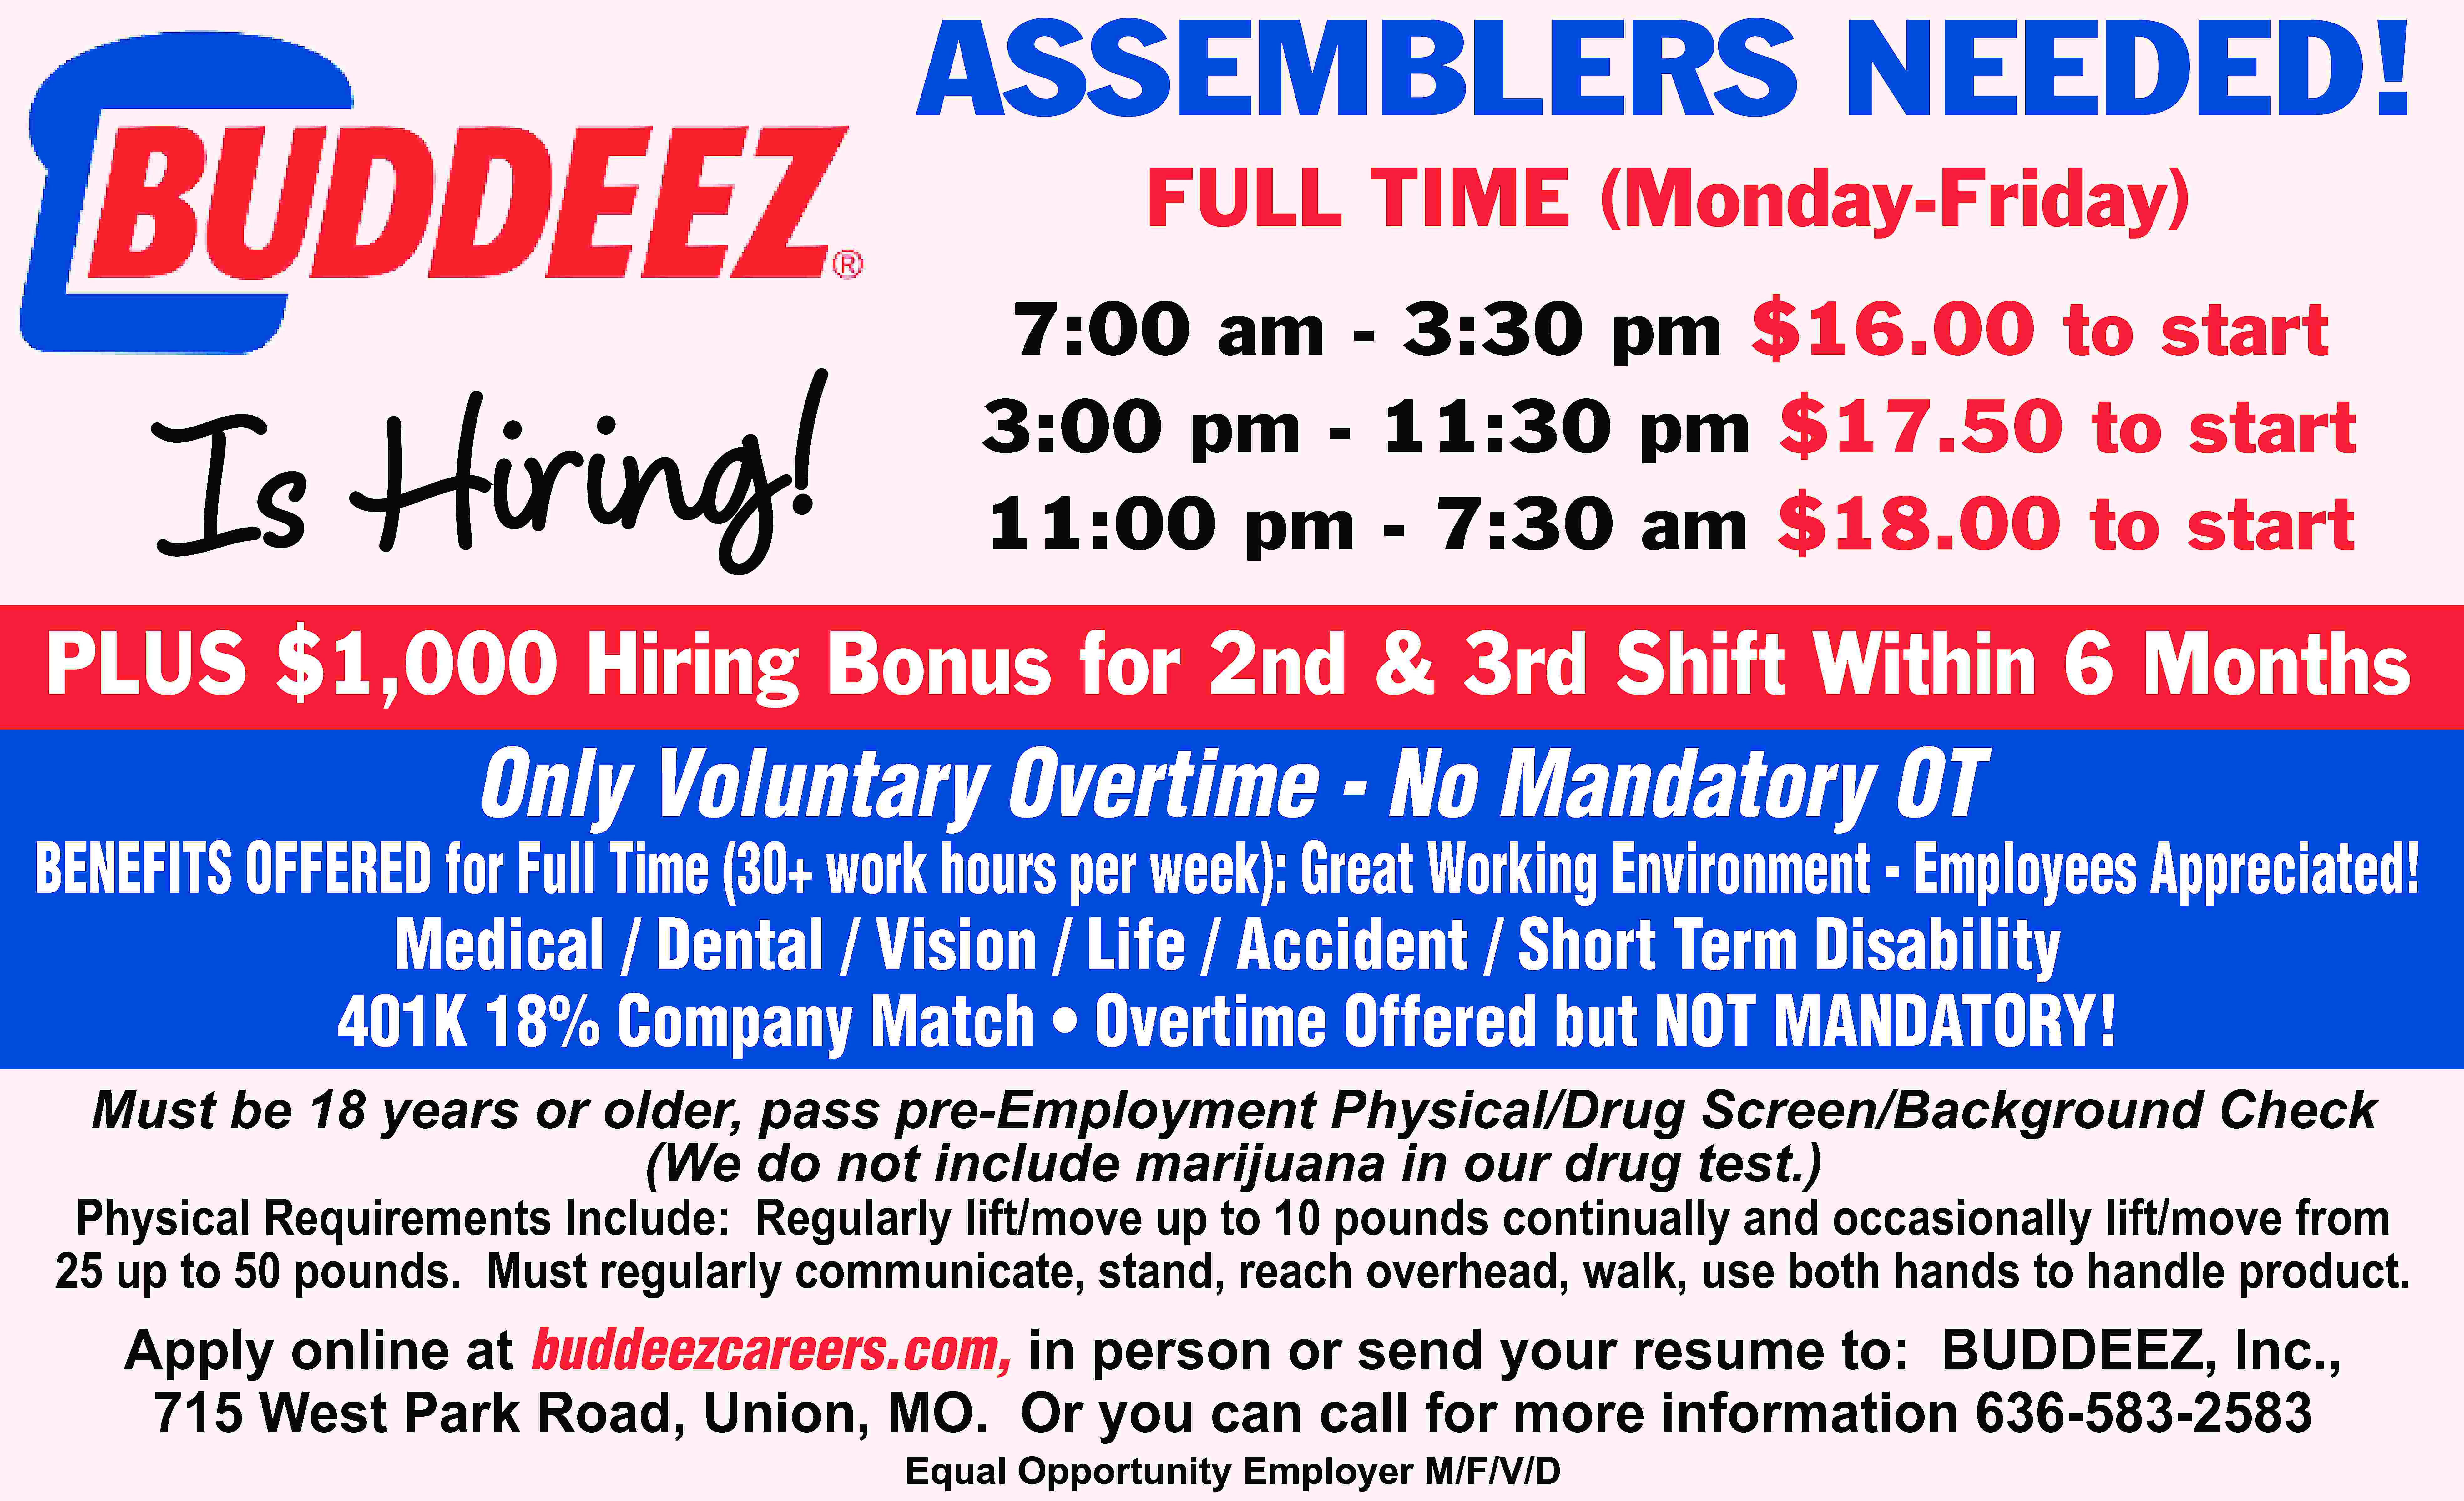 ASSEMBLERS NEEDED! FULL TIME (Monday-Friday)  ASSEMBLERS NEEDED! FULL TIME (Monday-Friday) Is Hiring! 7:00 am - 3:30 pm $16.00 to start 3:00 pm - 11:30 pm $17.50 to start 11:00 pm - 7:30 am $18.00 to start PLUS $1,000 Hiring Bonus for 2nd & 3rd Shift Within 6 Months Only Voluntary Overtime - No Mandatory OT BENEFITS OFFERED for Full Time (30+ work hours per week): Great Working Environment - Employees Appreciated! Medical / Dental / Vision / Life / Accident / Short Term Disability 401K 18% Company Match • Overtime Offered but NOT MANDATORY! Must be 18 years or older, pass pre-Employment Physical/Drug Screen/Background Check (We do not include marijuana in our drug test.) Physical Requirements Include: Regularly lift/move up to 10 pounds continually and occasionally lift/move from 25 up to 50 pounds. Must regularly communicate, stand, reach overhead, walk, use both hands to handle product. Apply online at buddeezcareers.com, in person or send your resume to: BUDDEEZ, Inc., 715 West Park Road, Union, MO. Or you can call for more information 636-583-2583 Equal Opportunity Employer M/F/V/D